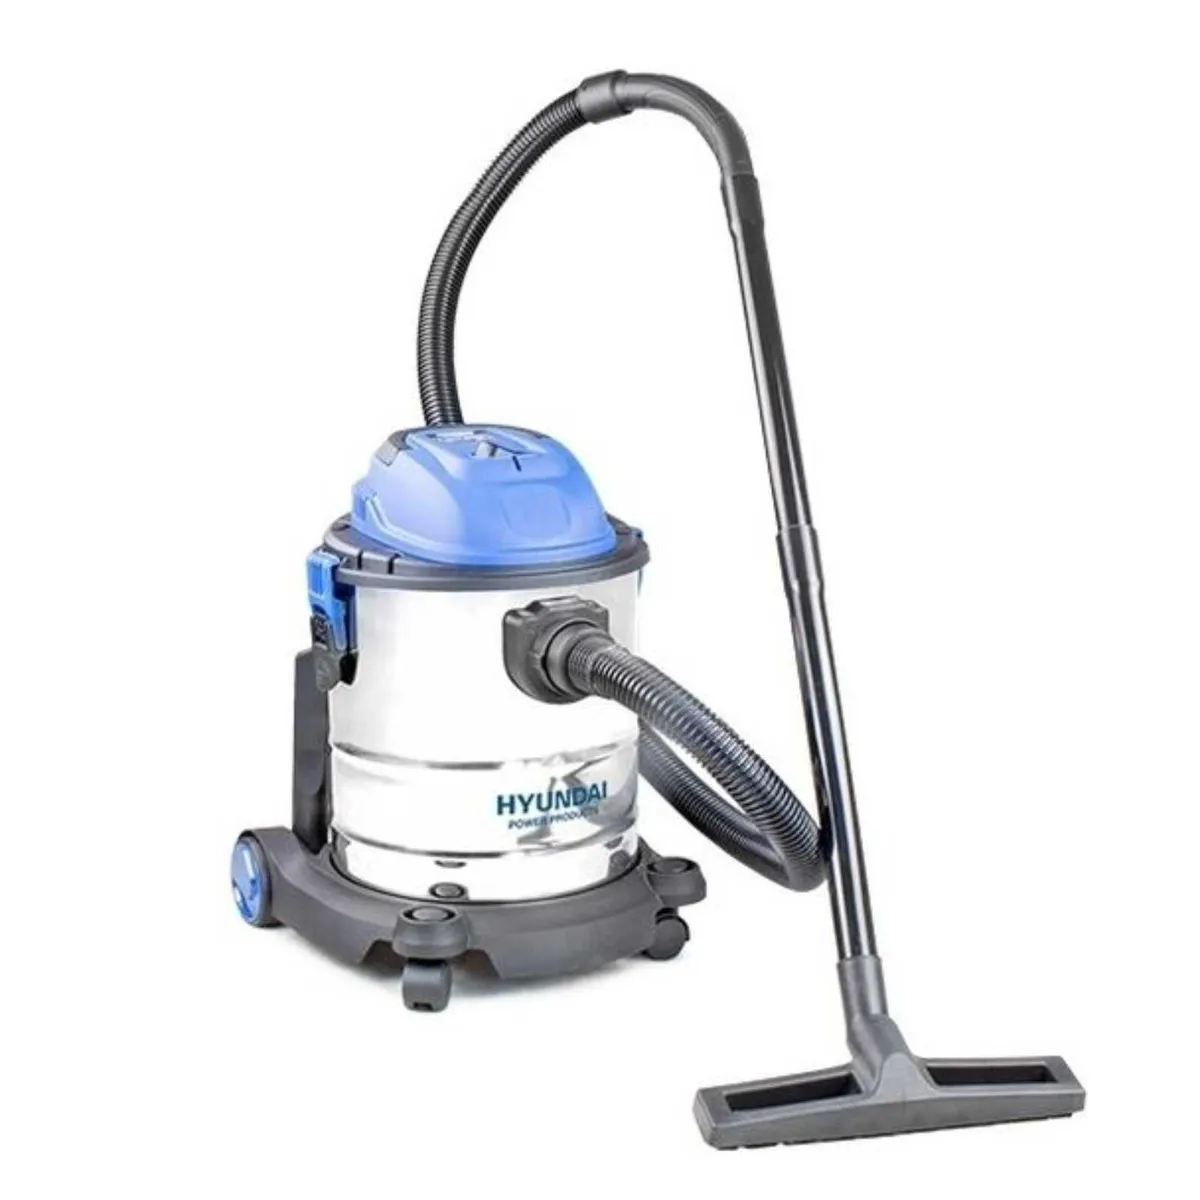 Hyundai 1200W 3-In-1 Wet And Dry Vacuum Cleaner - Image 1